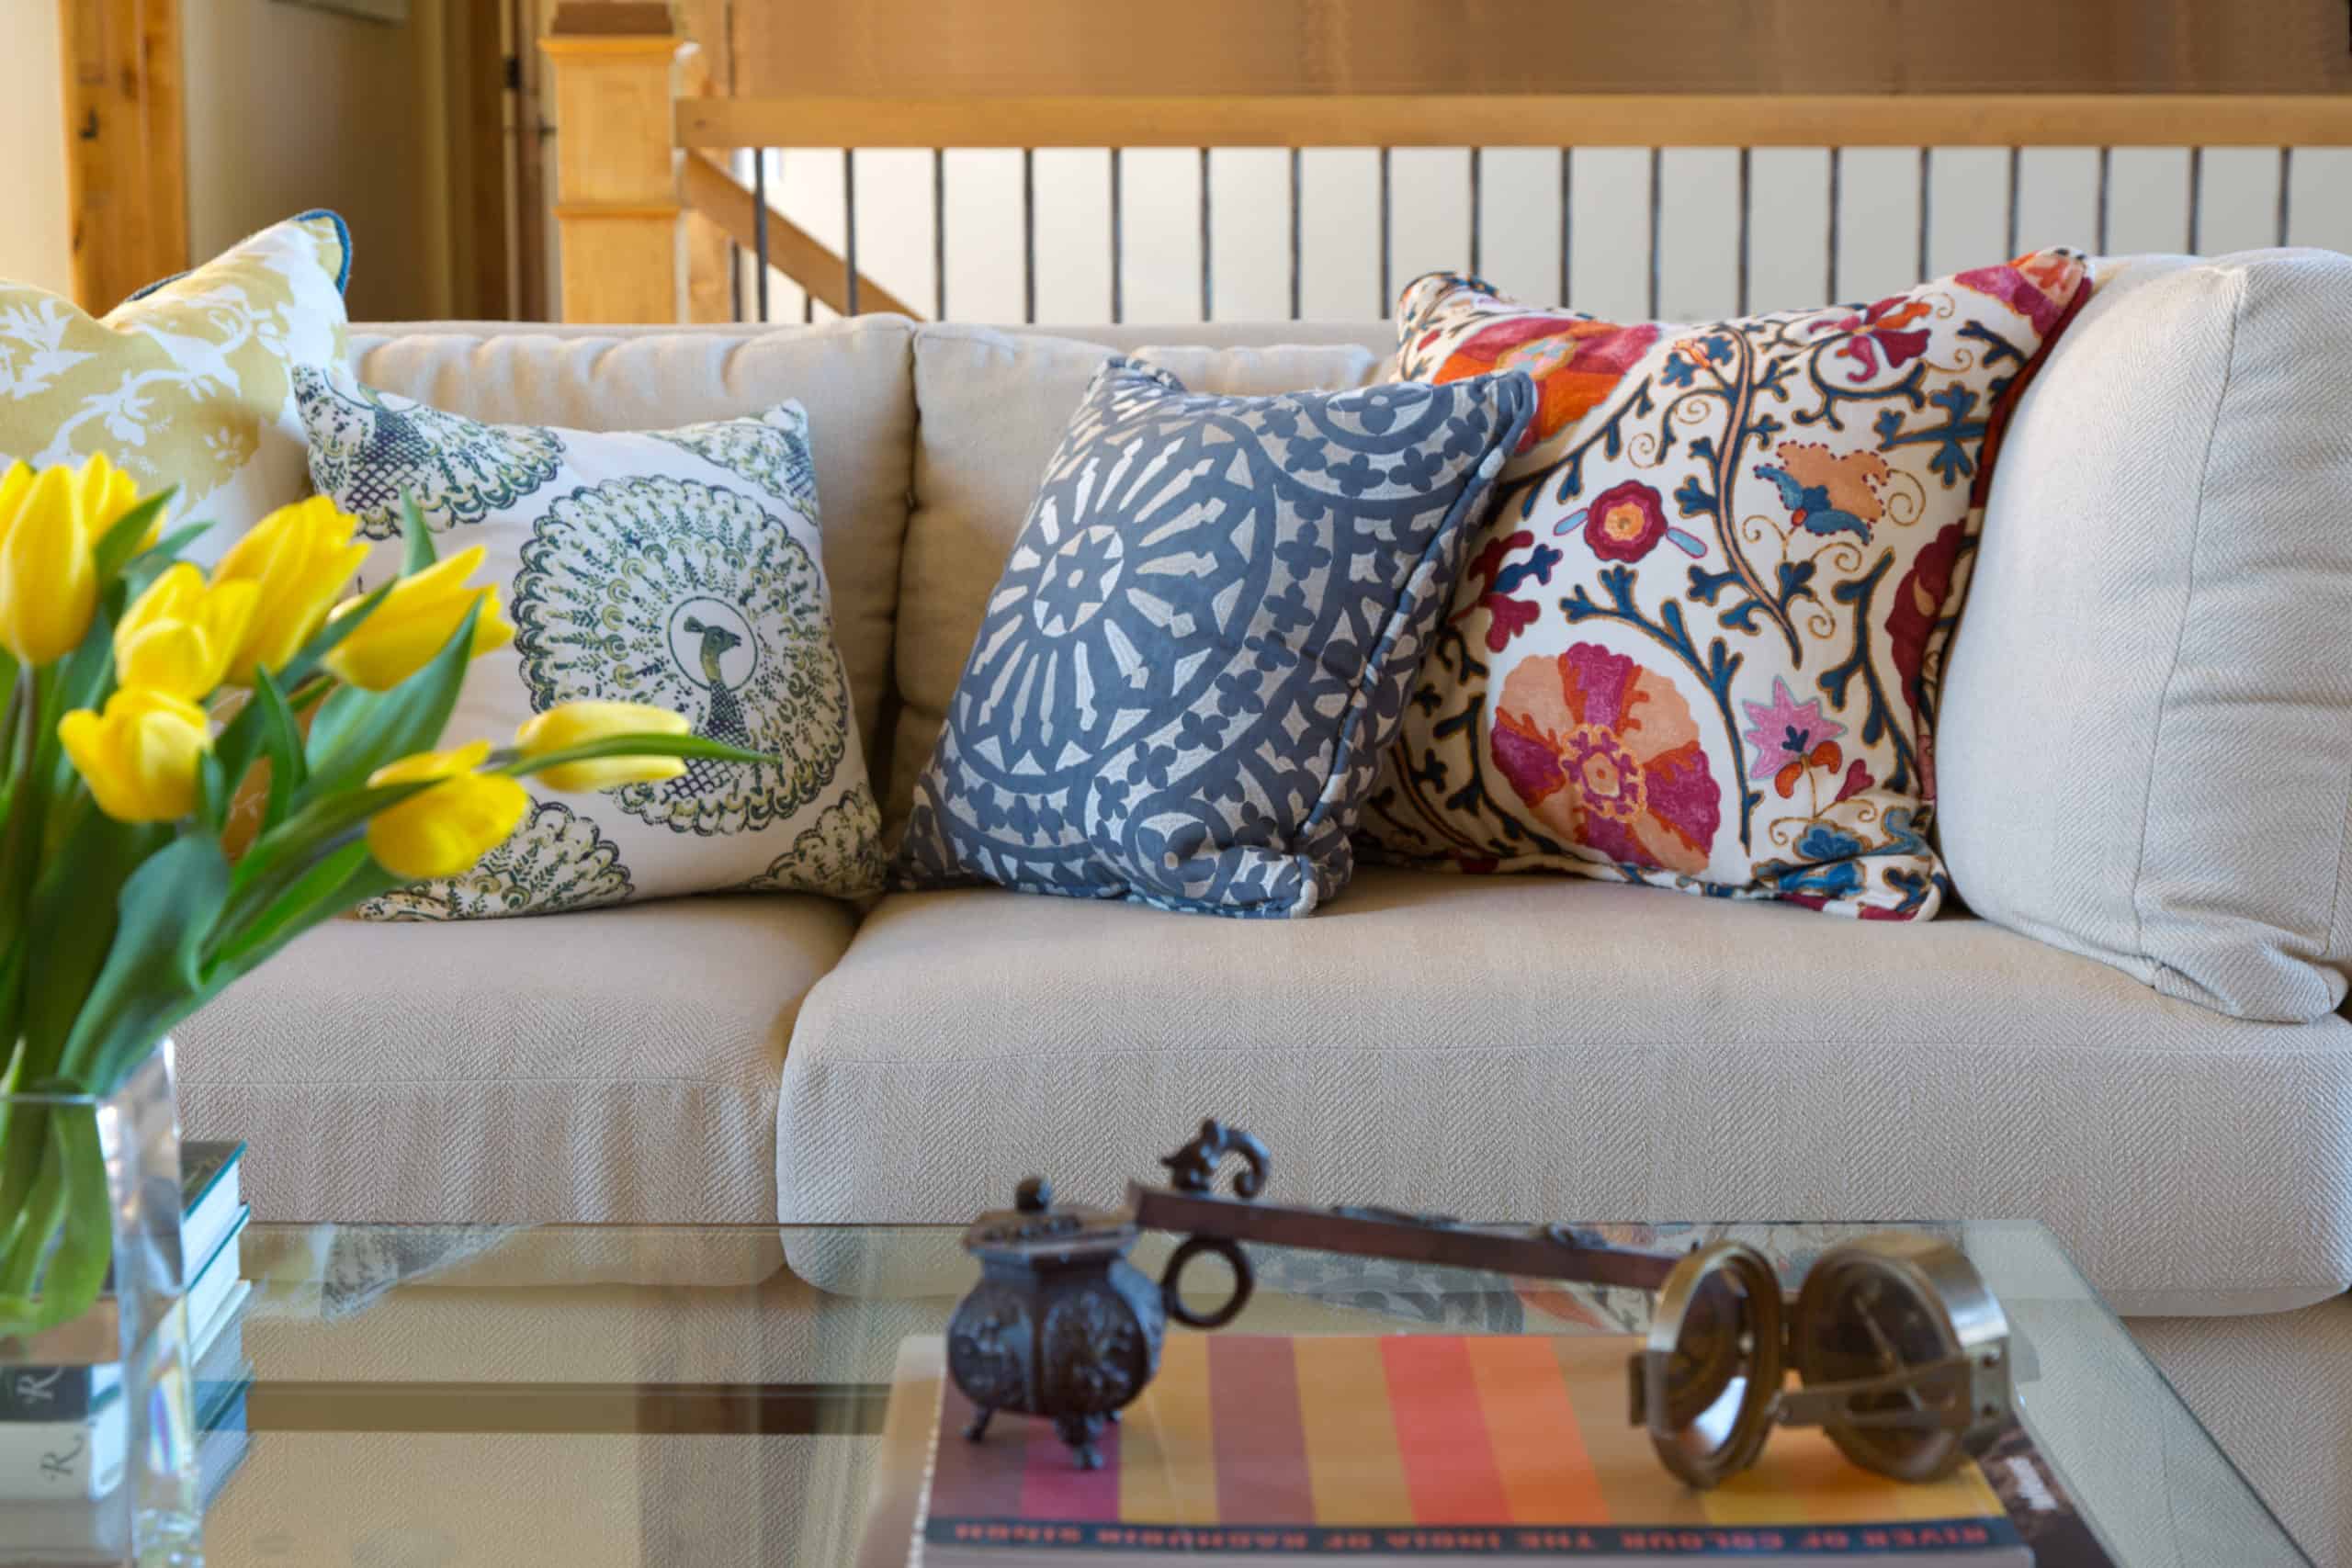 Custom pillows designed by one of best interior design companies in Colorado